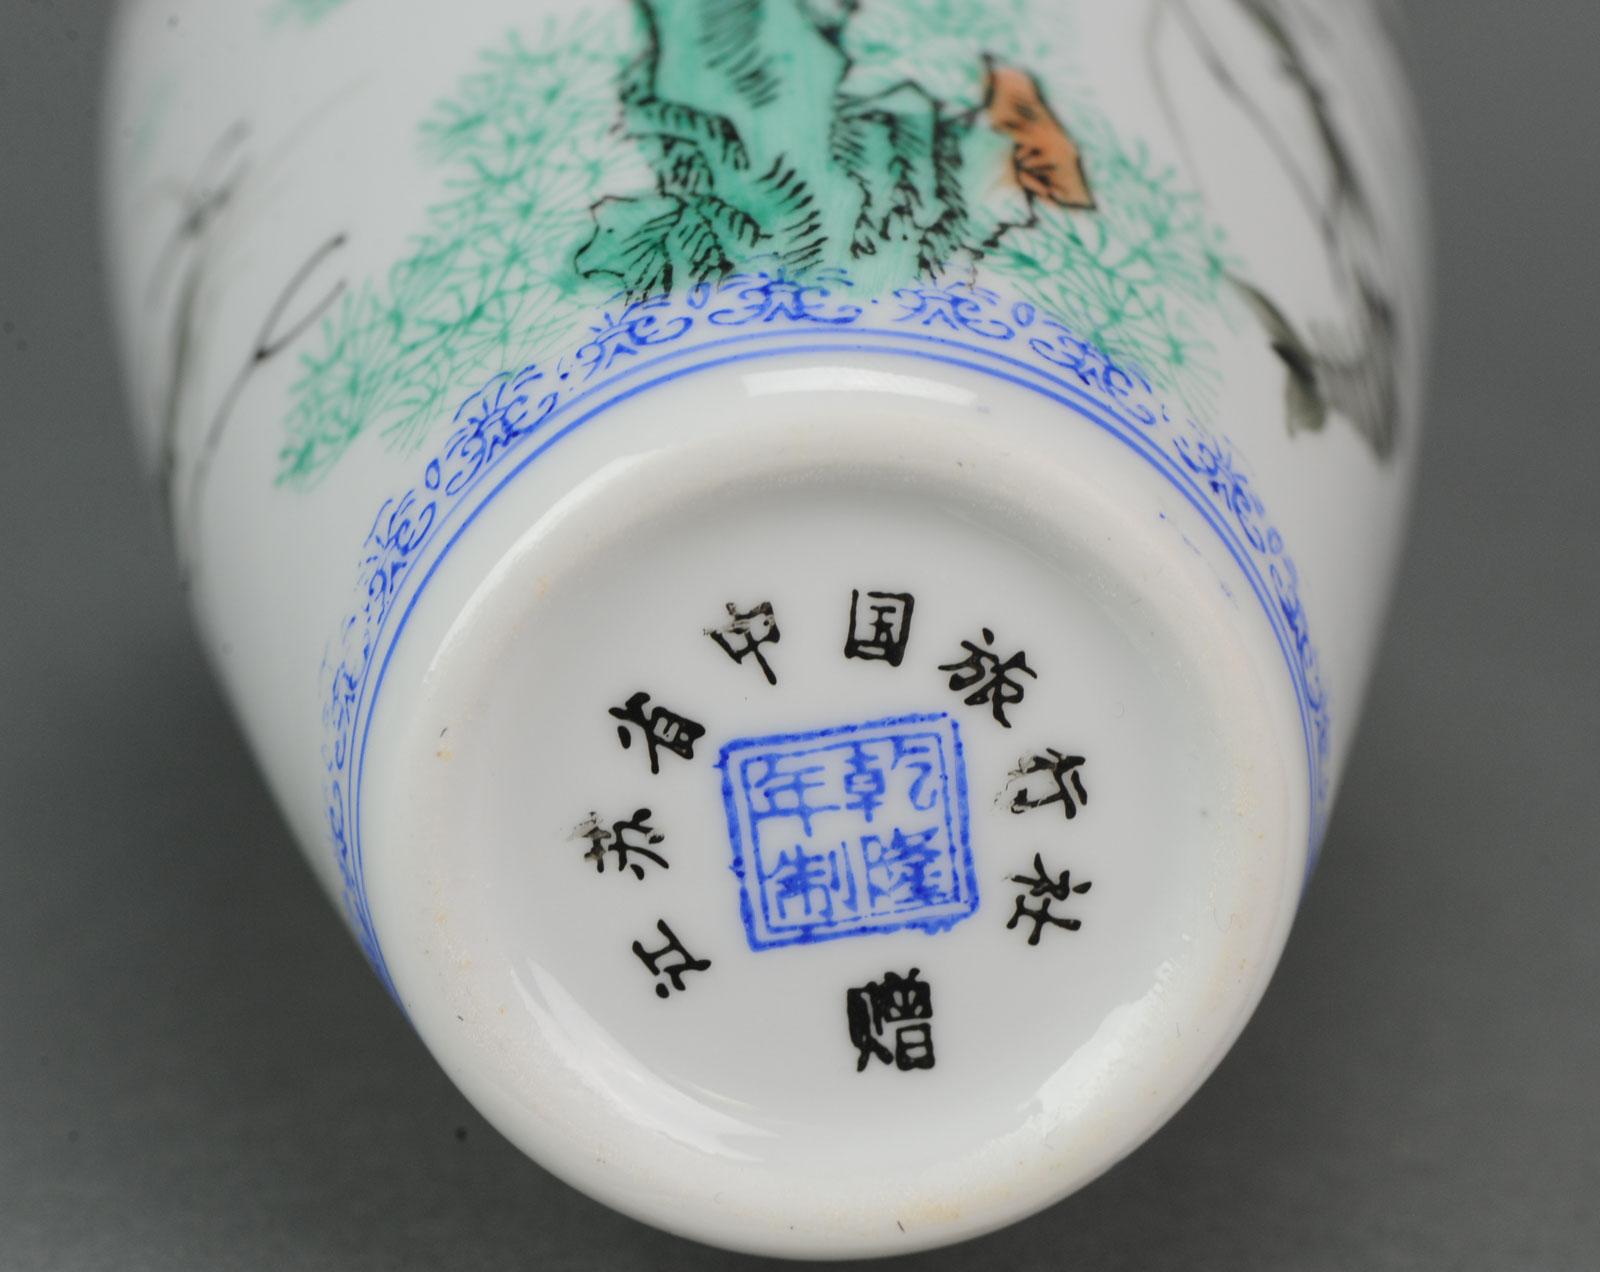 Crayfish Jingdezhen Proc Eggshell Porcelain Vase Chinese Marked, 20th Century In Good Condition For Sale In Amsterdam, Noord Holland